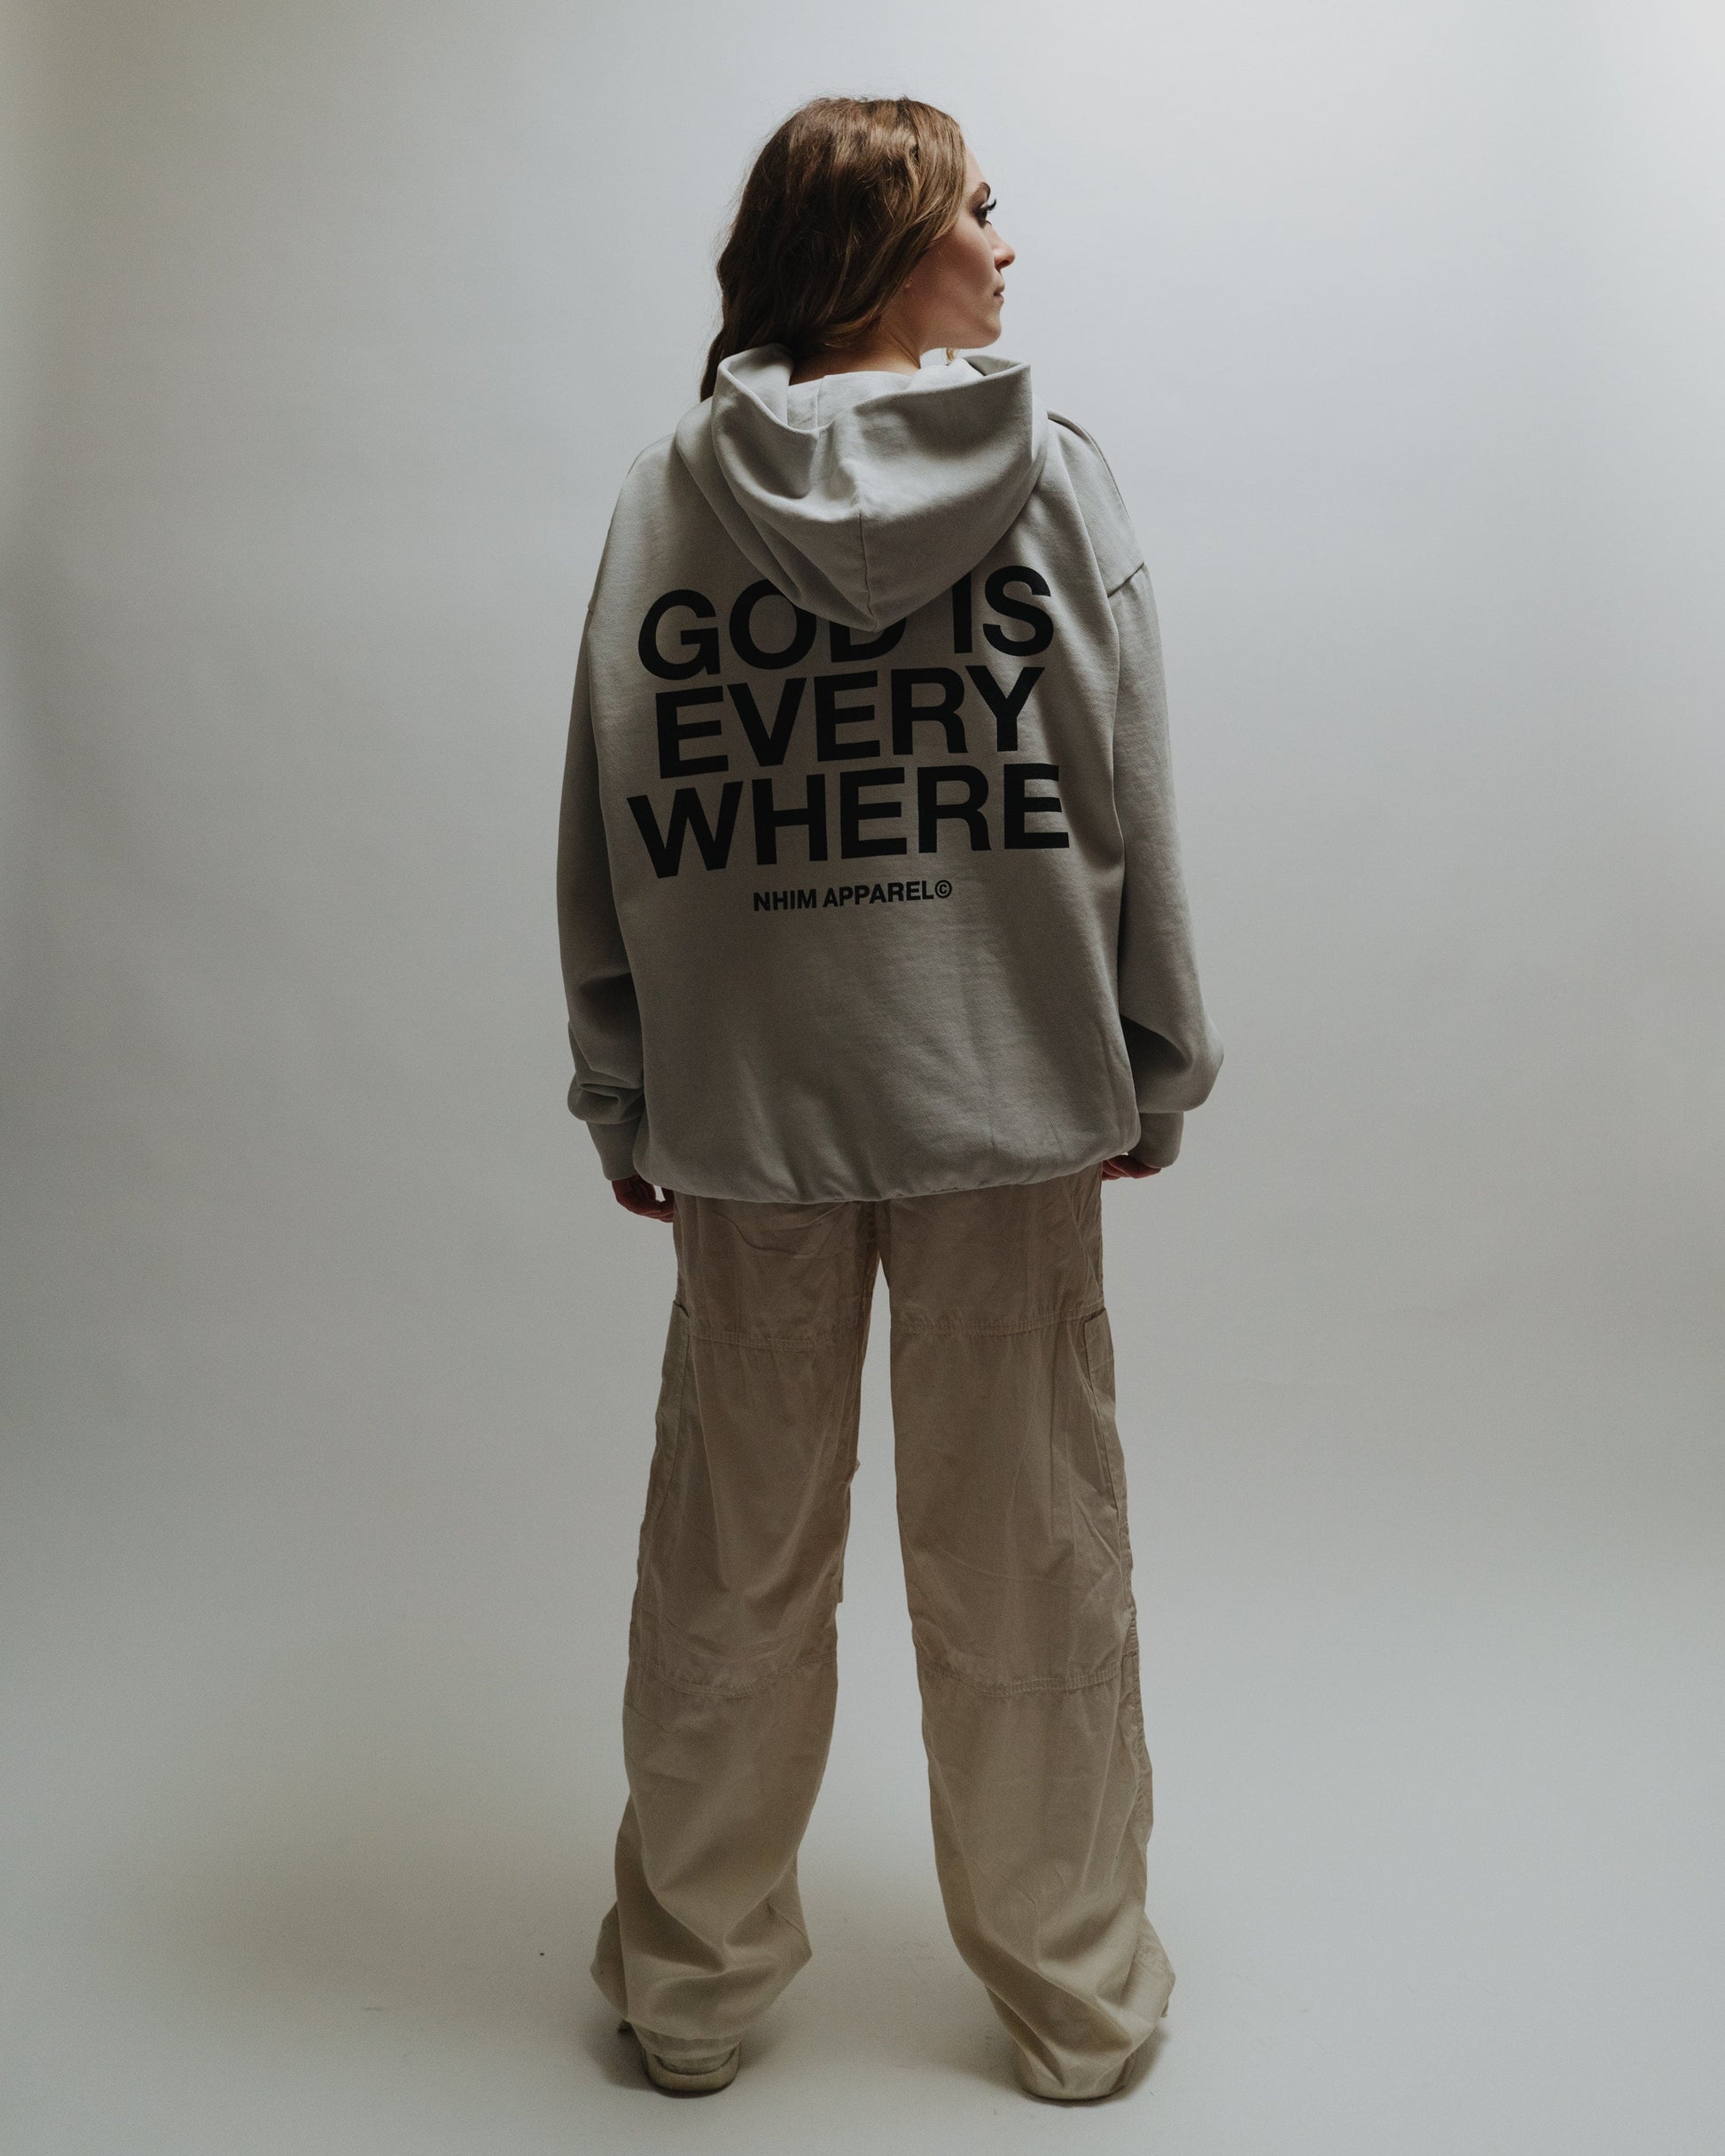 God Is Everywhere Christian hoodie in Cement, Garment Dyed Made in the USA by NHIM Apparel Christian Clothing Brand